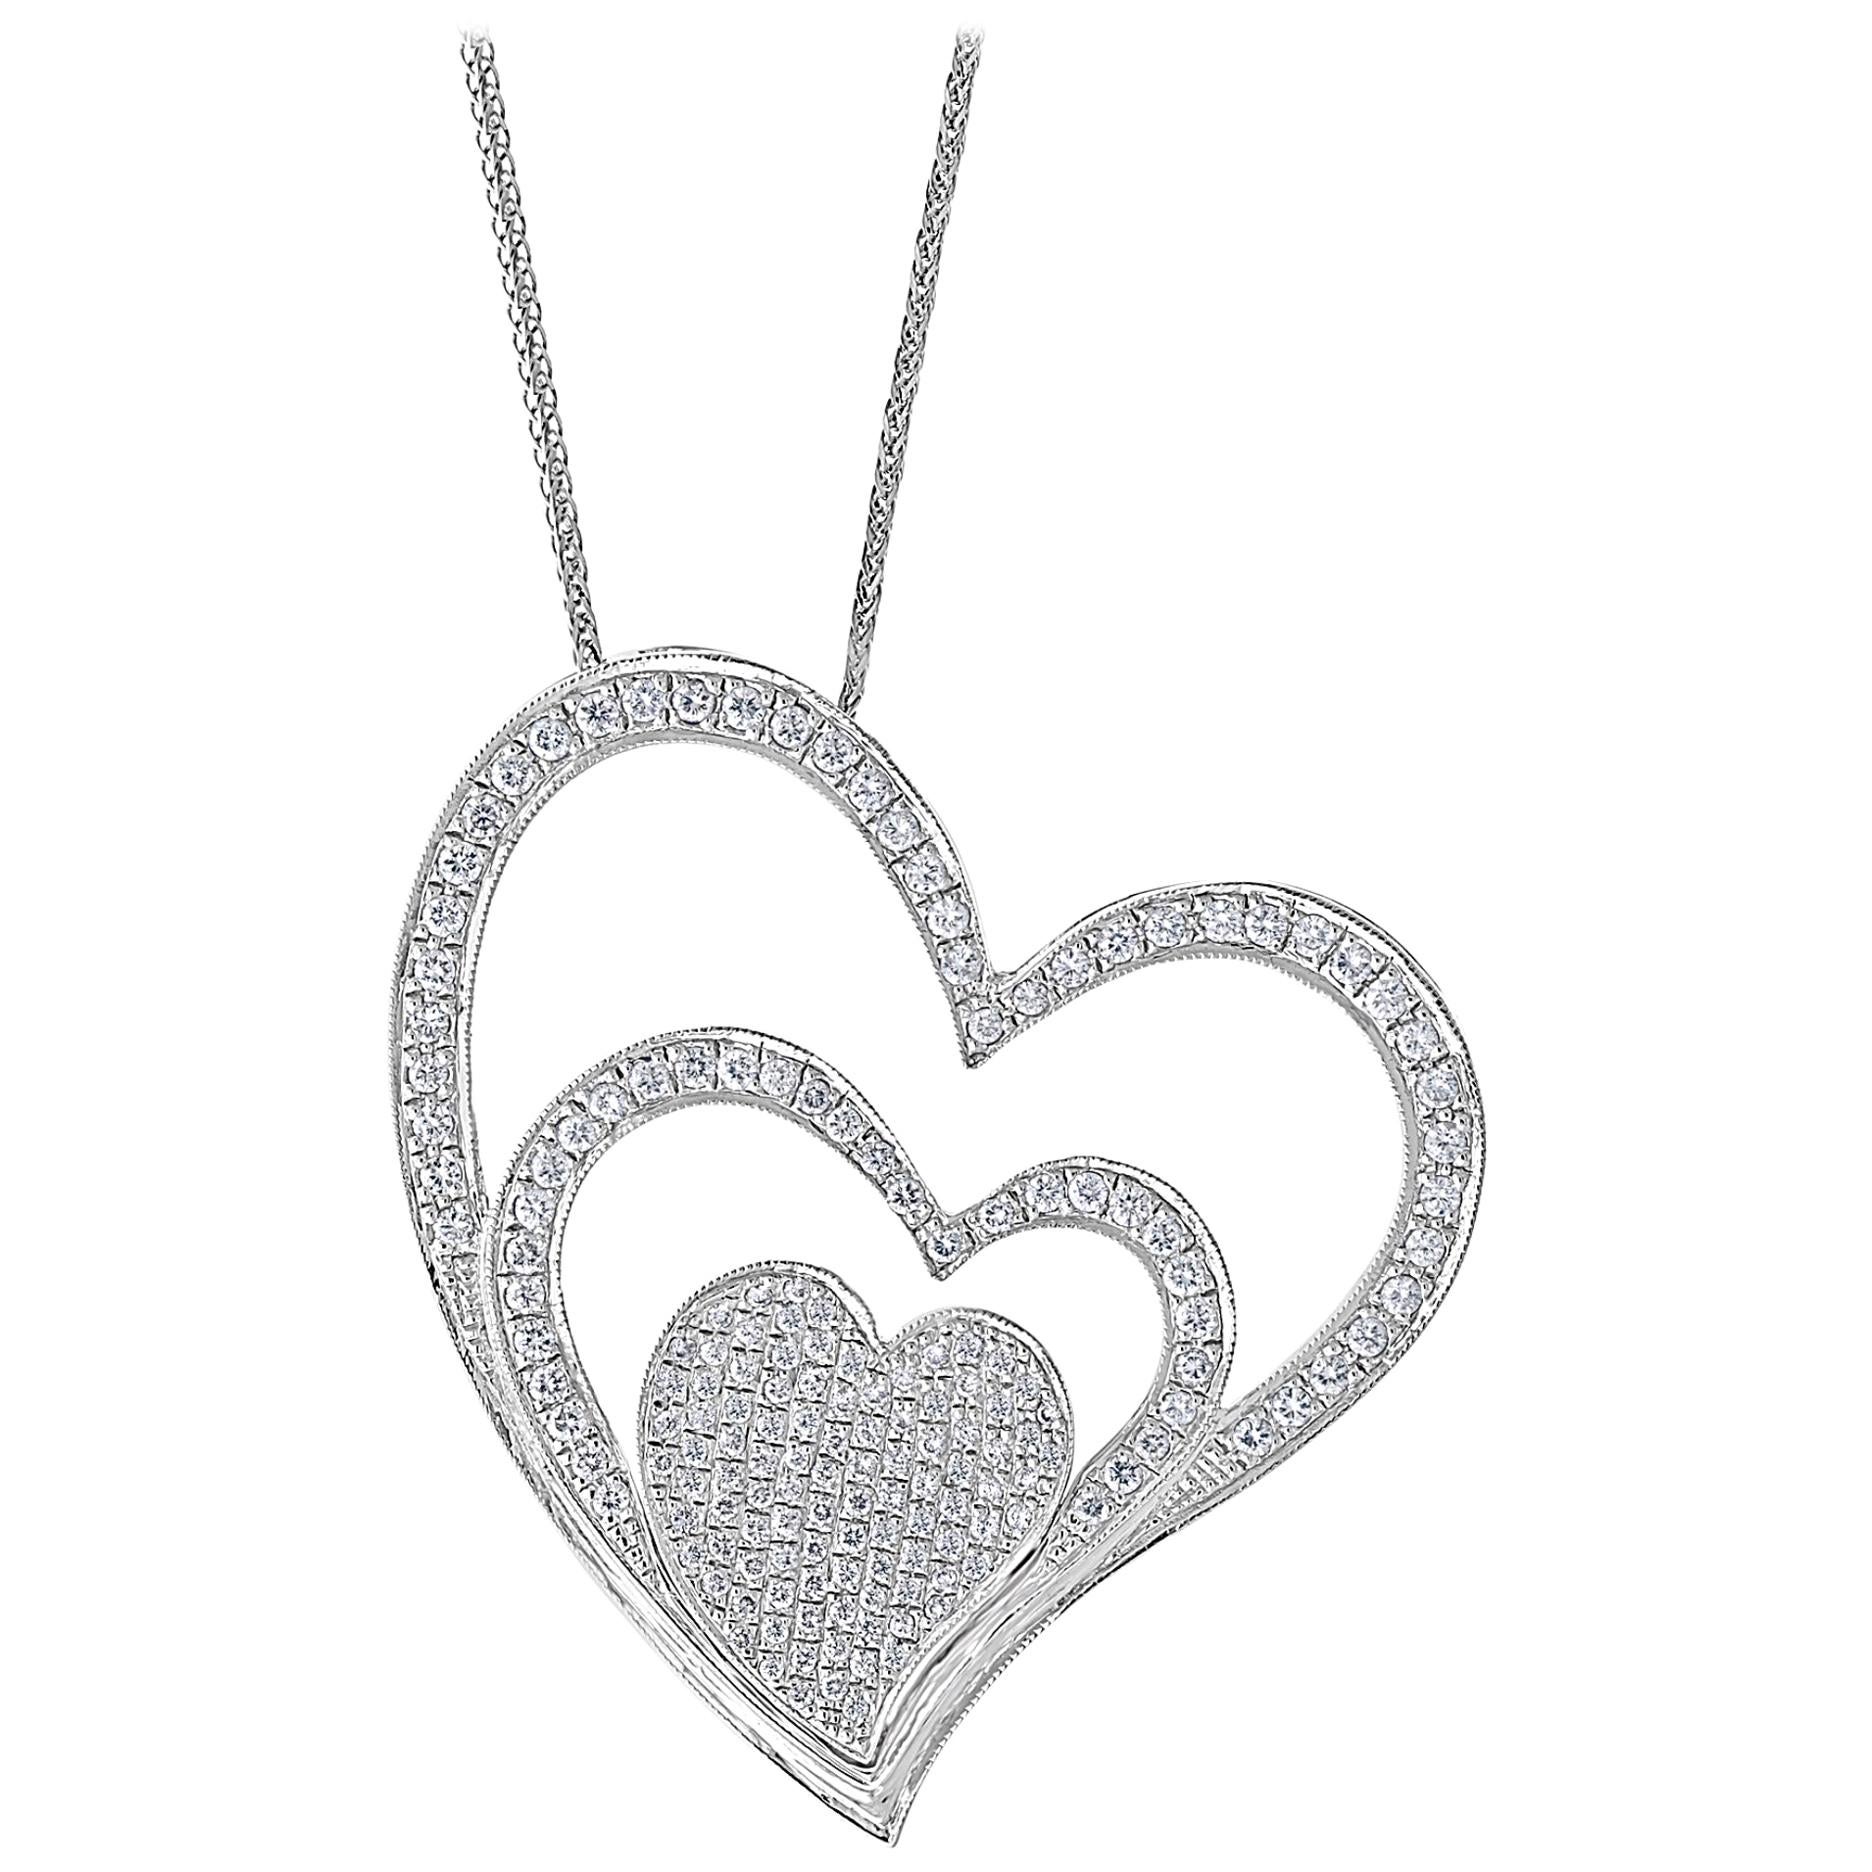 3.6 Ct Diamond 3 Heart Pendant or Necklace 18 K White Gold with 14 K Gold Chain